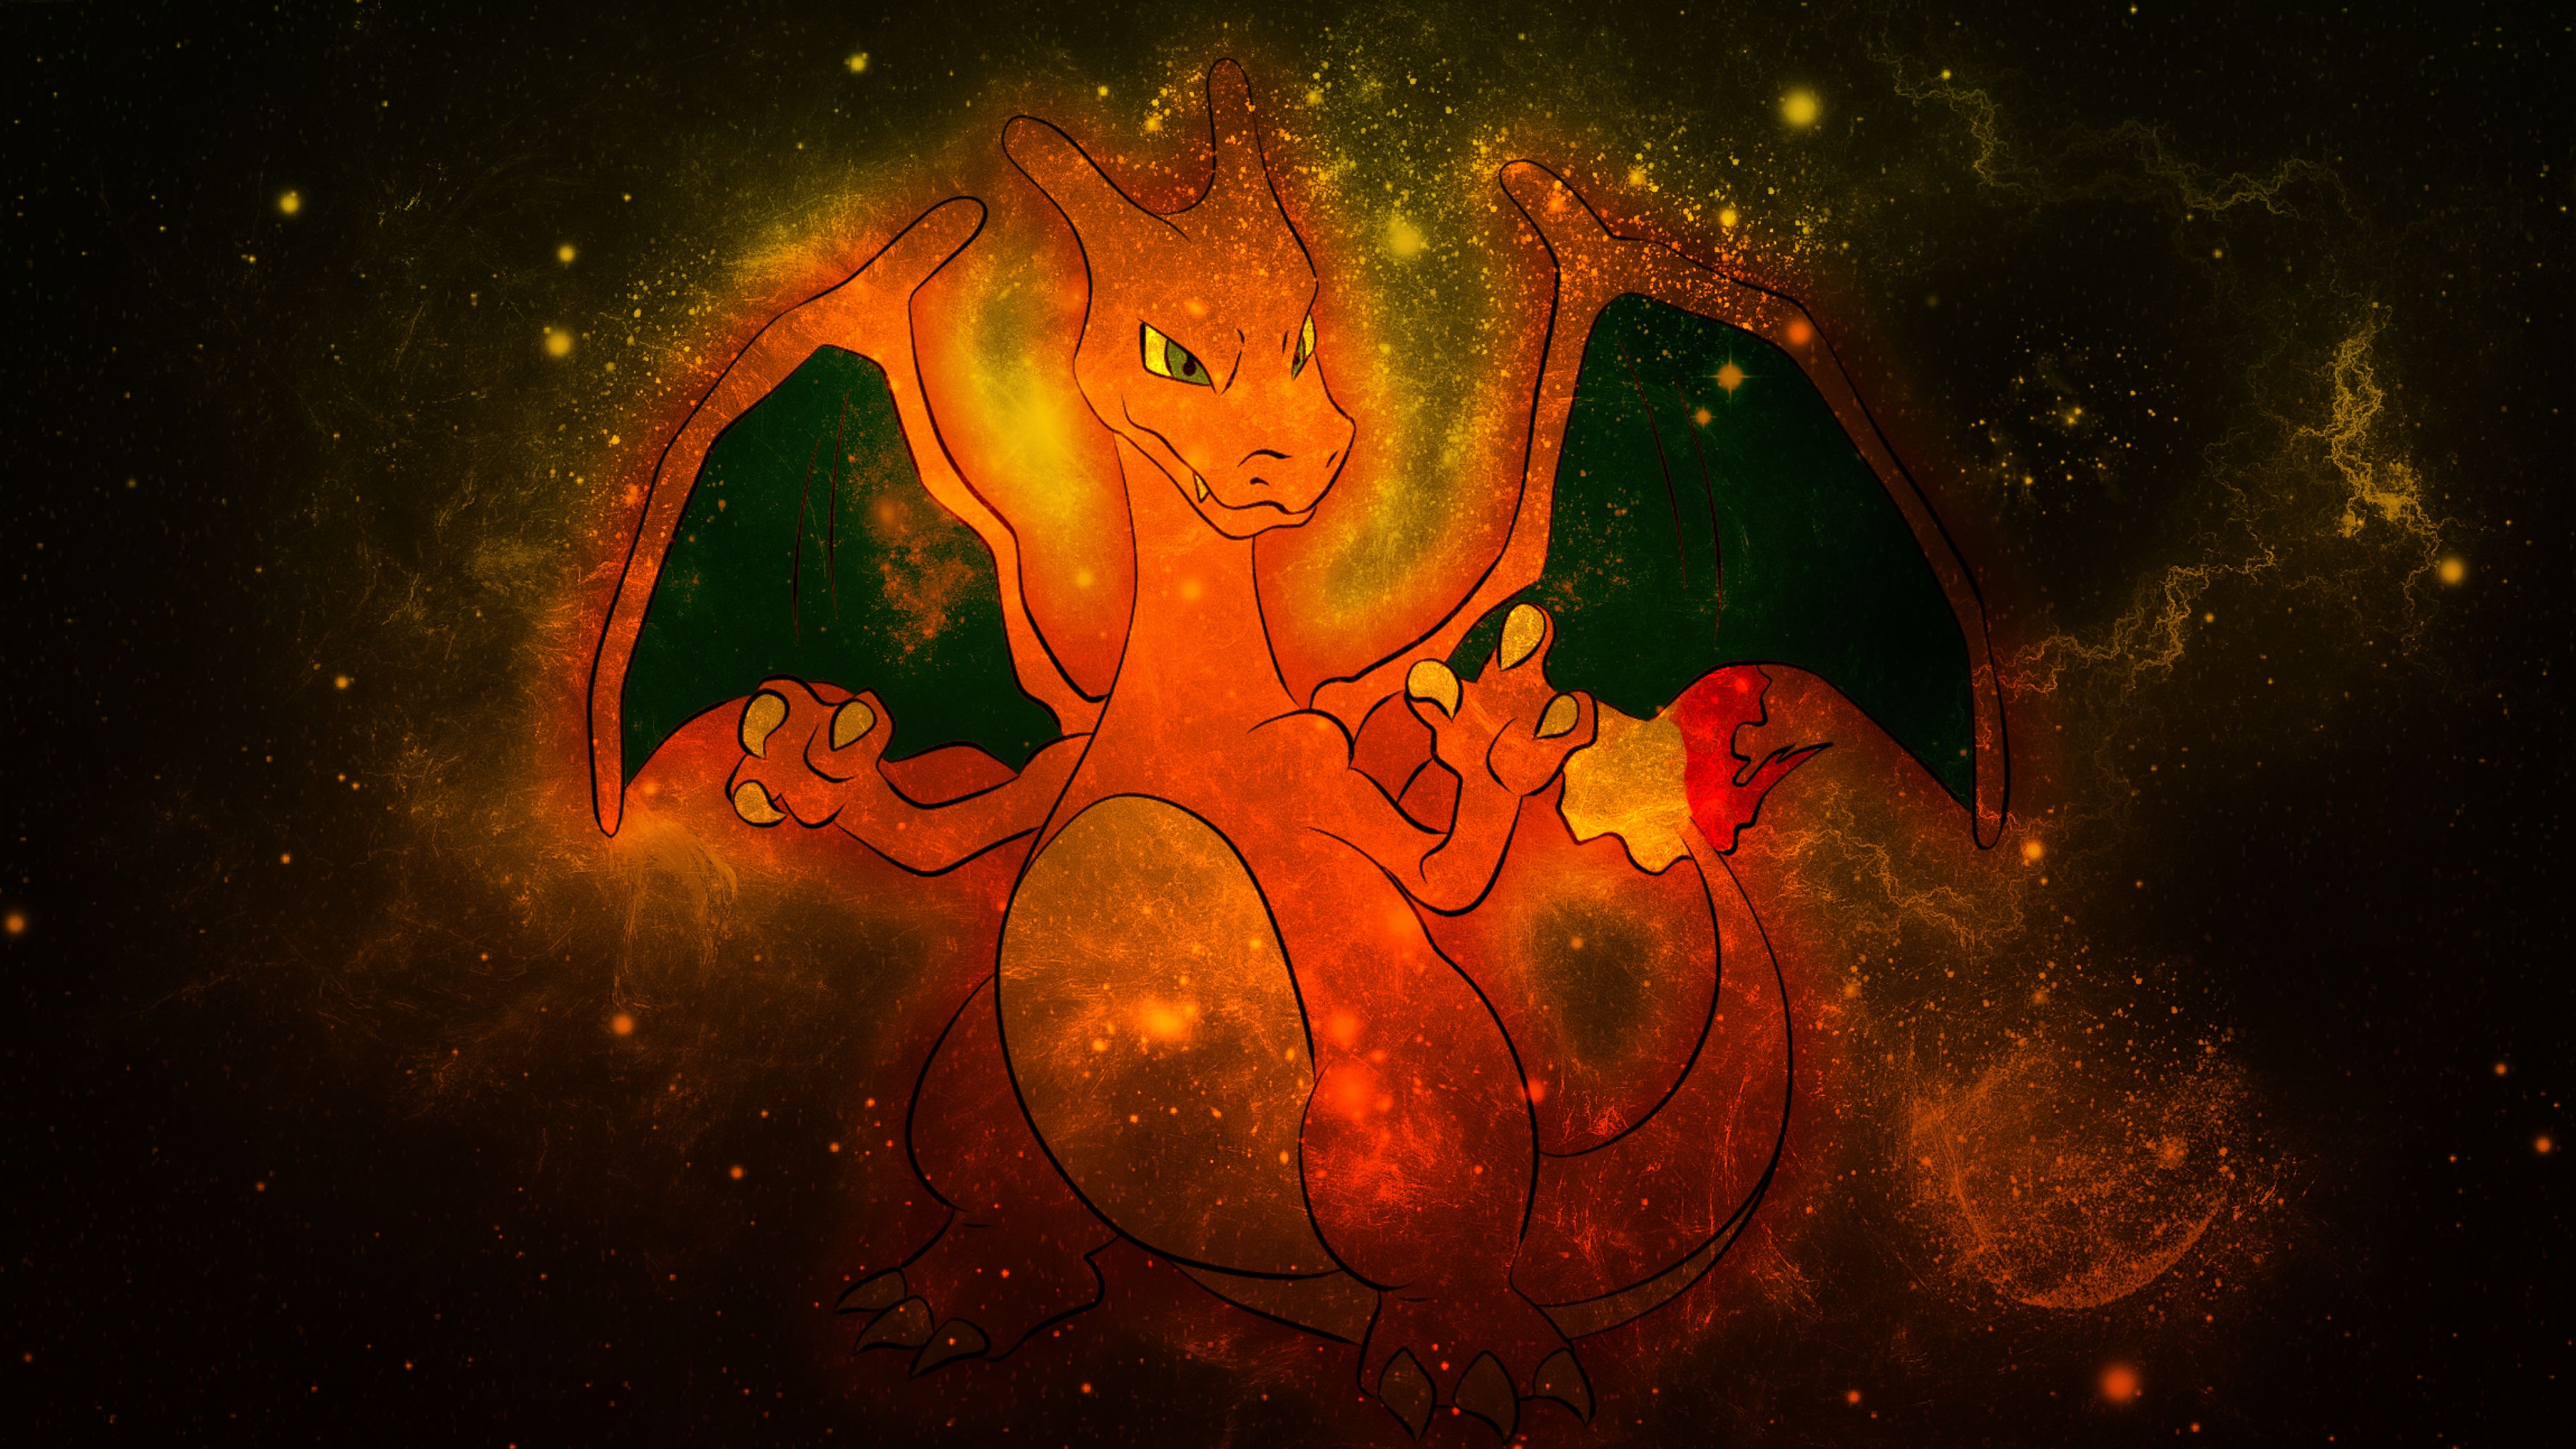 Free download Charizard 4k Ultra HD Wallpaper and Background 3840x2160 [3840x2160] for your Desktop, Mobile & Tablet. Explore Charizard Background. Charmander Wallpaper, Awesome Charizard Wallpaper, Shiny Charizard Wallpaper